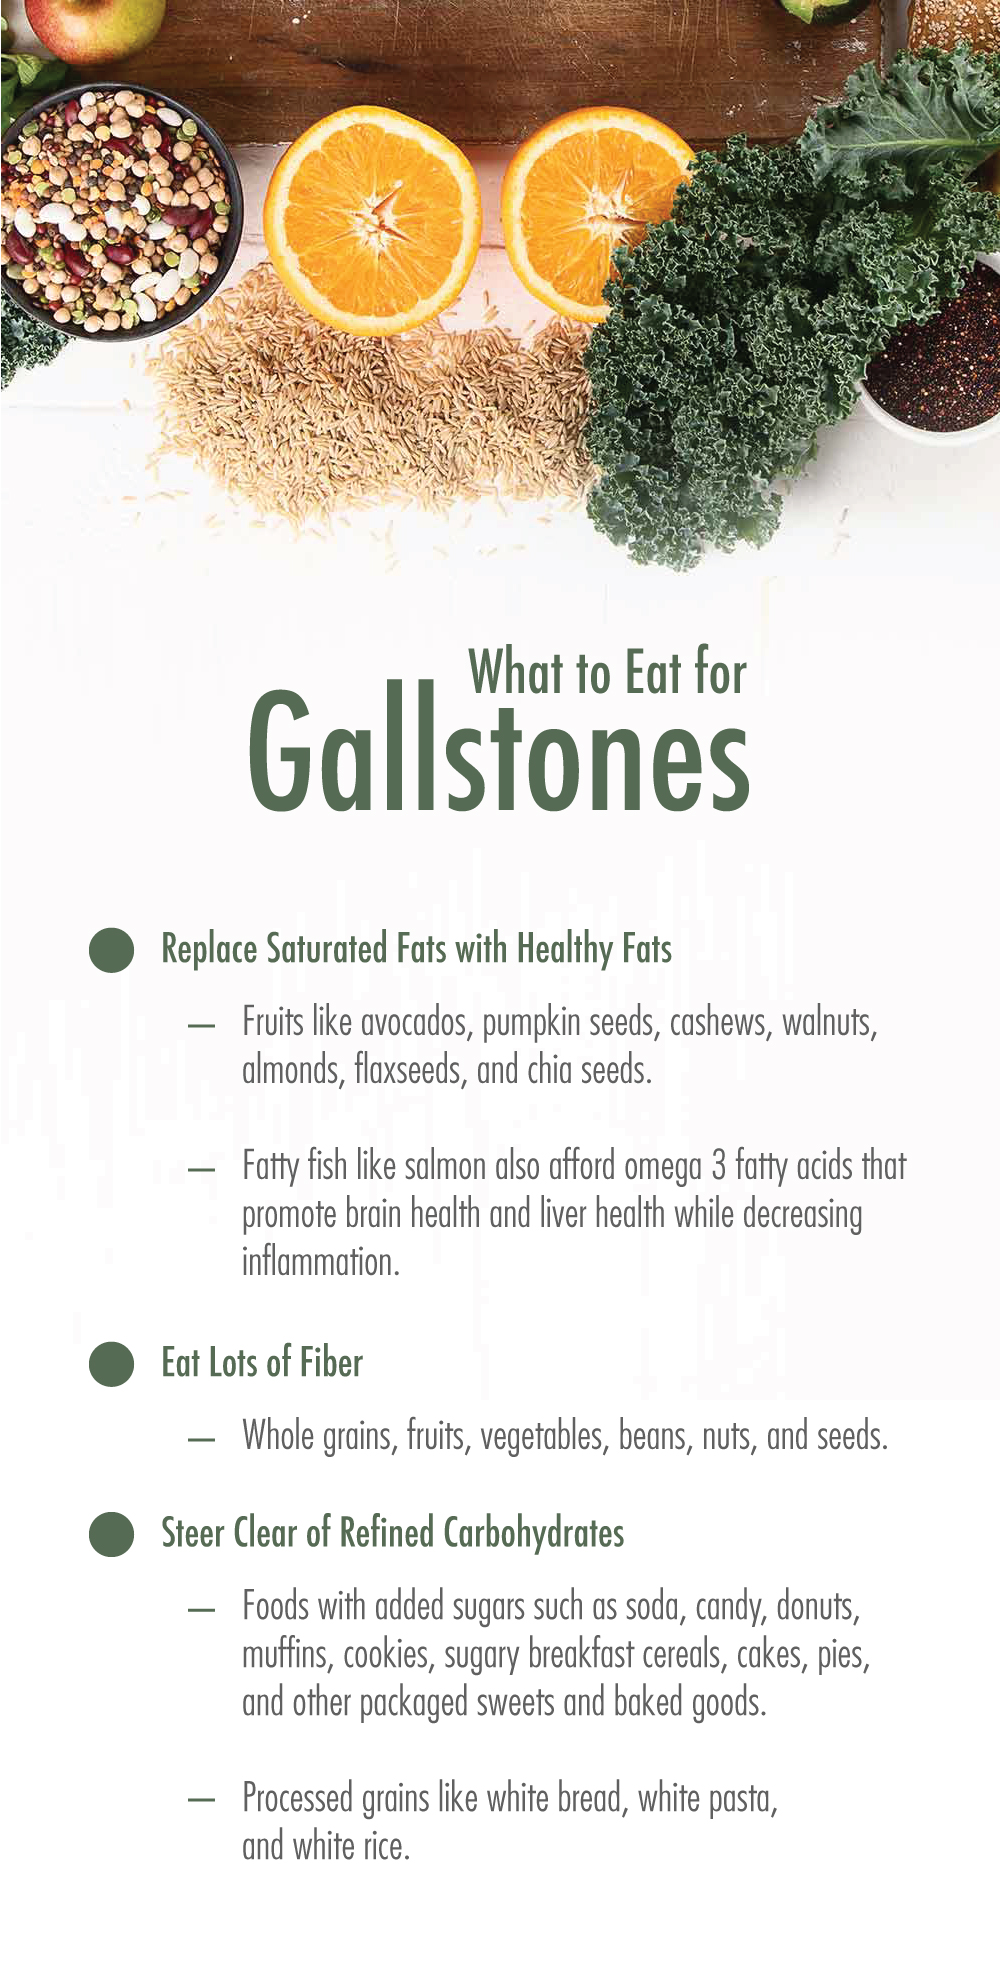 Gallstone Diet: What to Eat for Gallstones